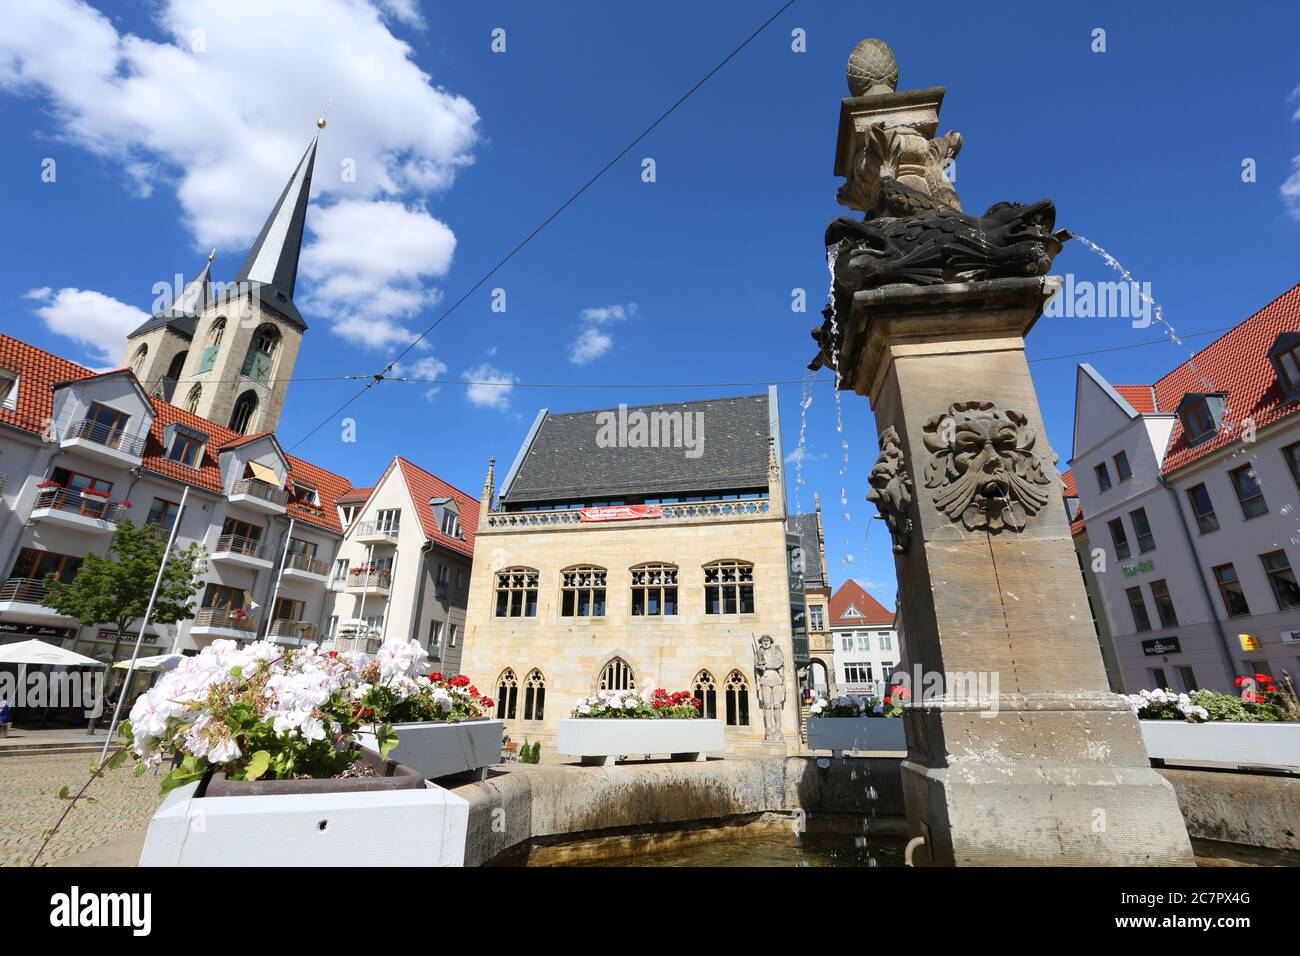 Halberstadt, Germany. 13th July, 2020. The Halberstadt town hall, recorded on election Sunday for the mayoral election. In the run-off vote, two candidates apply for the office of Lord Mayor of Halberstadt and for moving into the town hall. Credit: Matthias Bein/dpa-Zentralbild/ZB/dpa/Alamy Live News Stock Photo